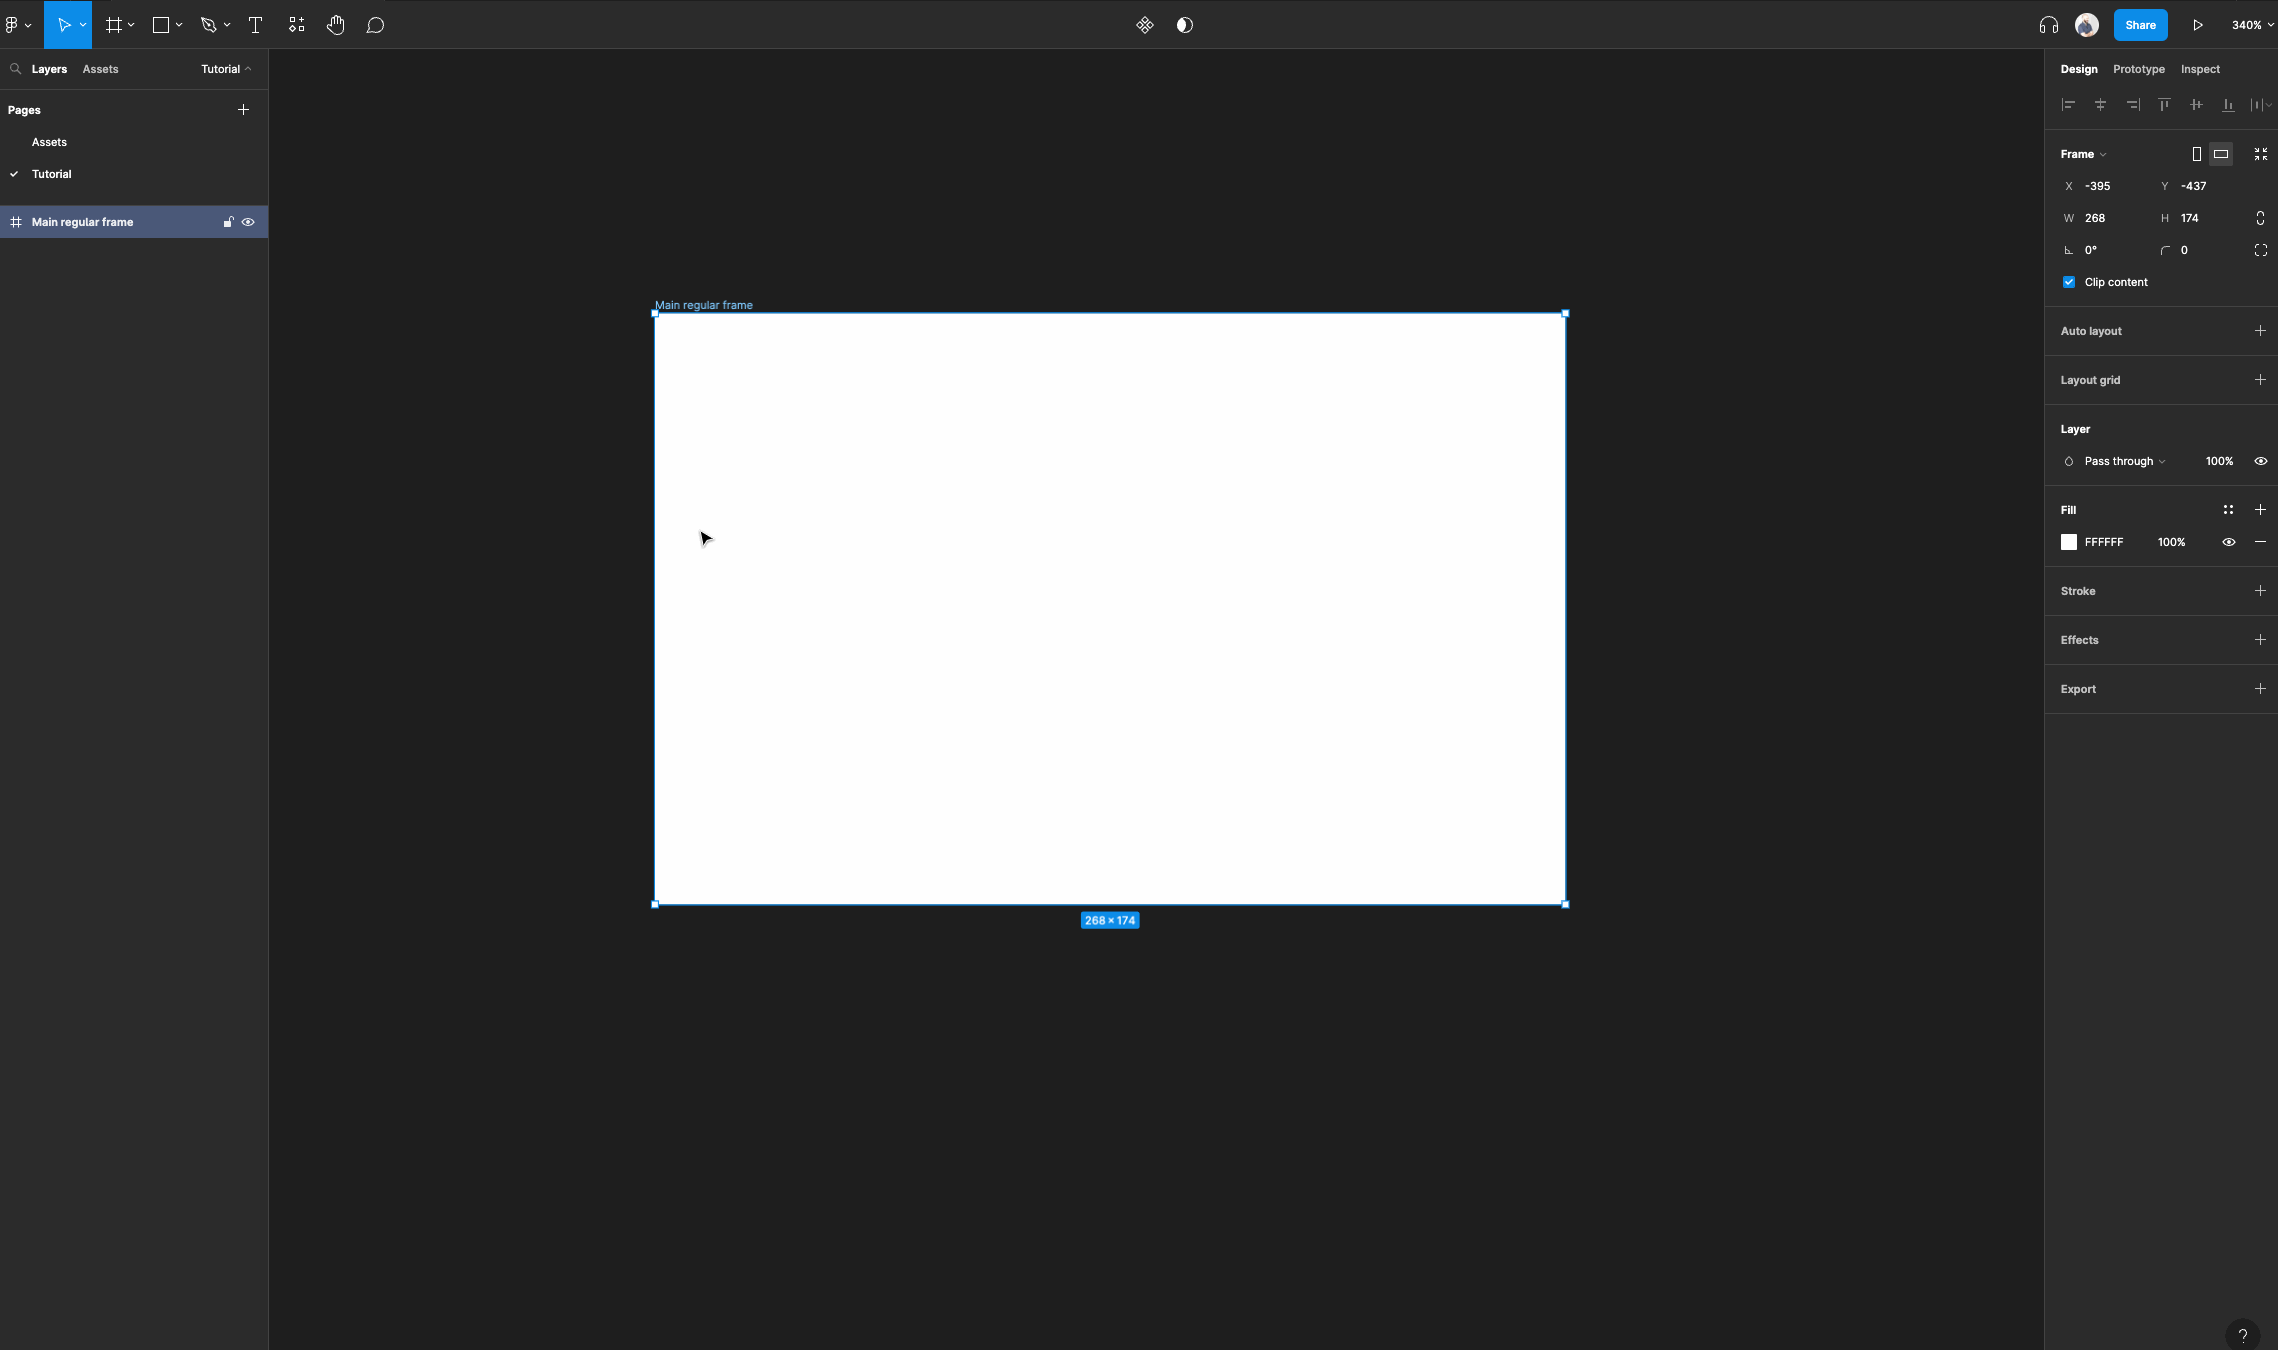 Add a text layer